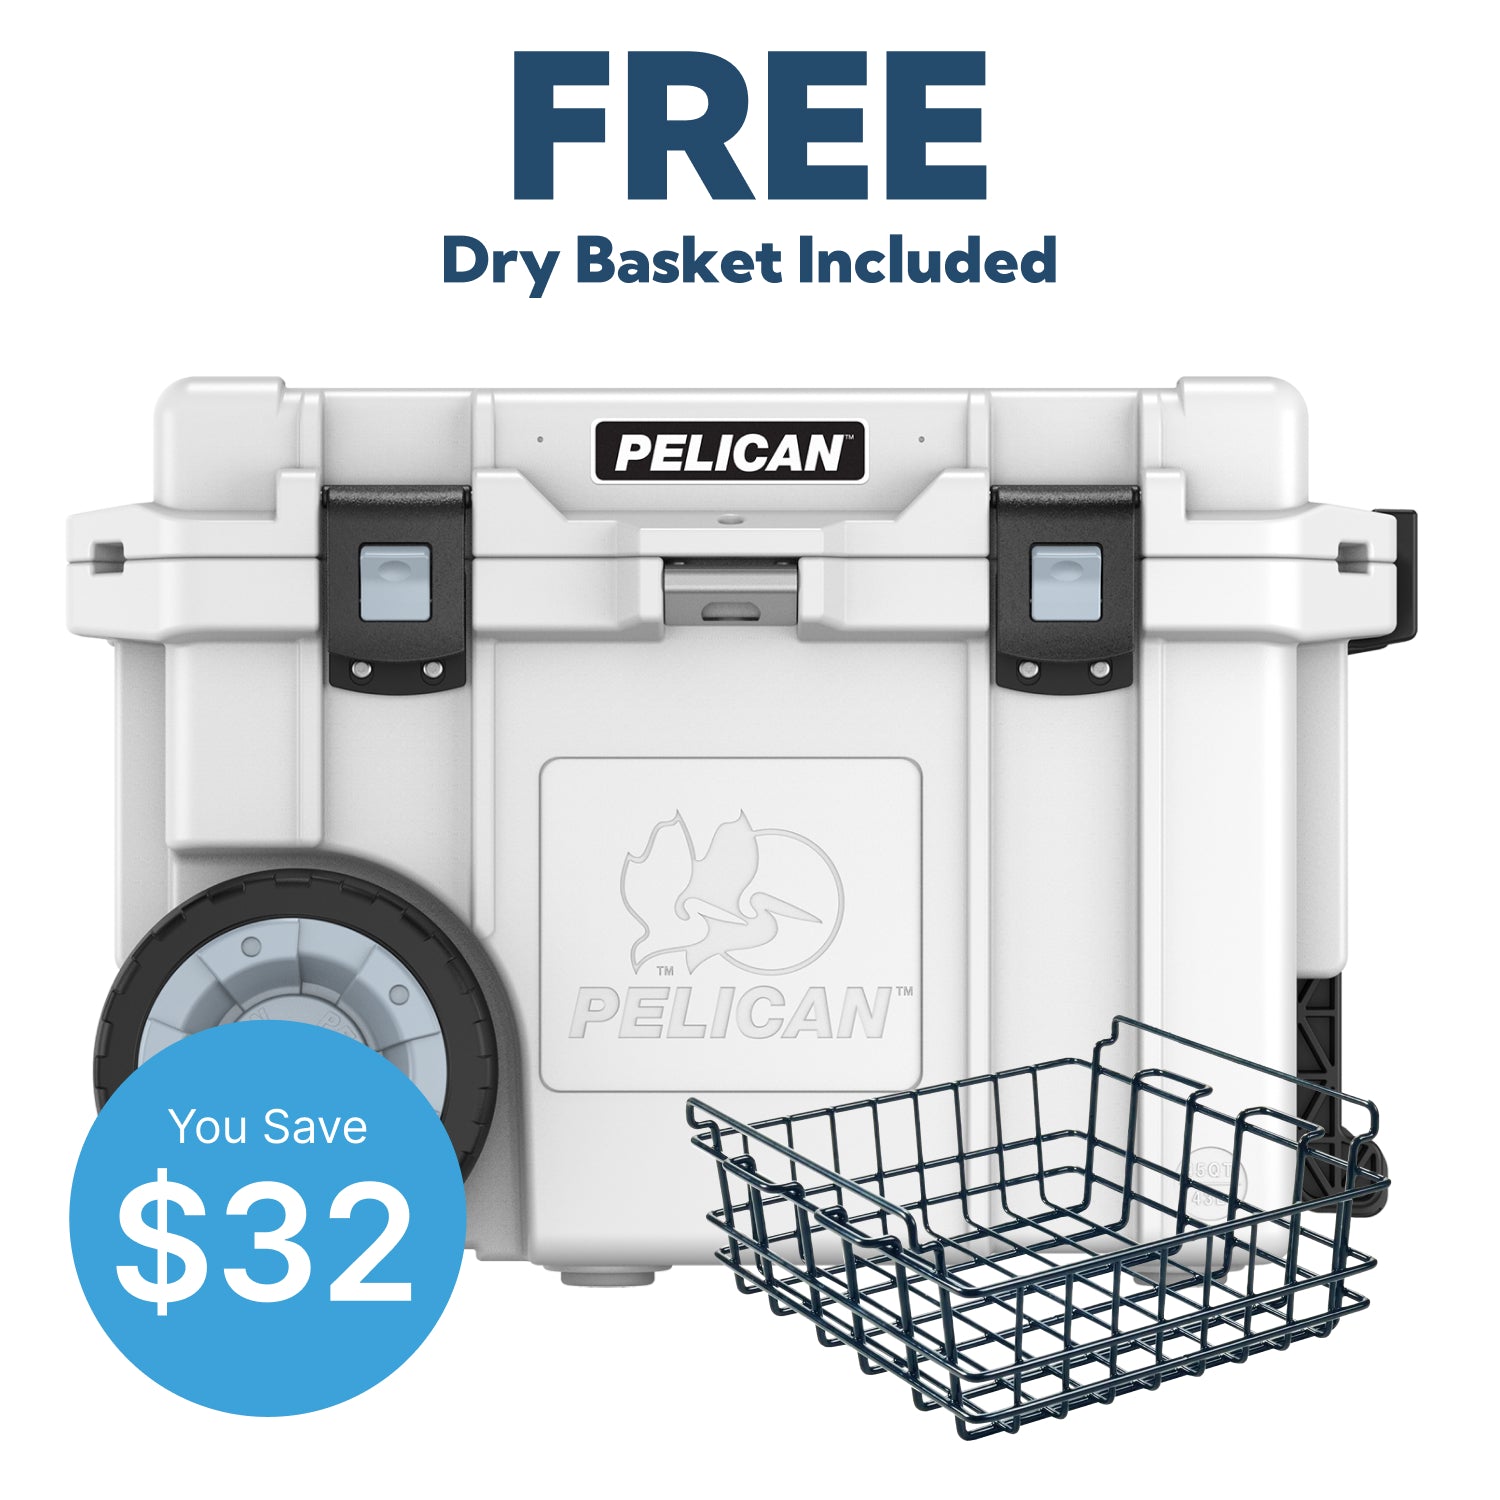 Charcoal Pelican 45QT Cooler with Free Pelican Dry Rack Basket